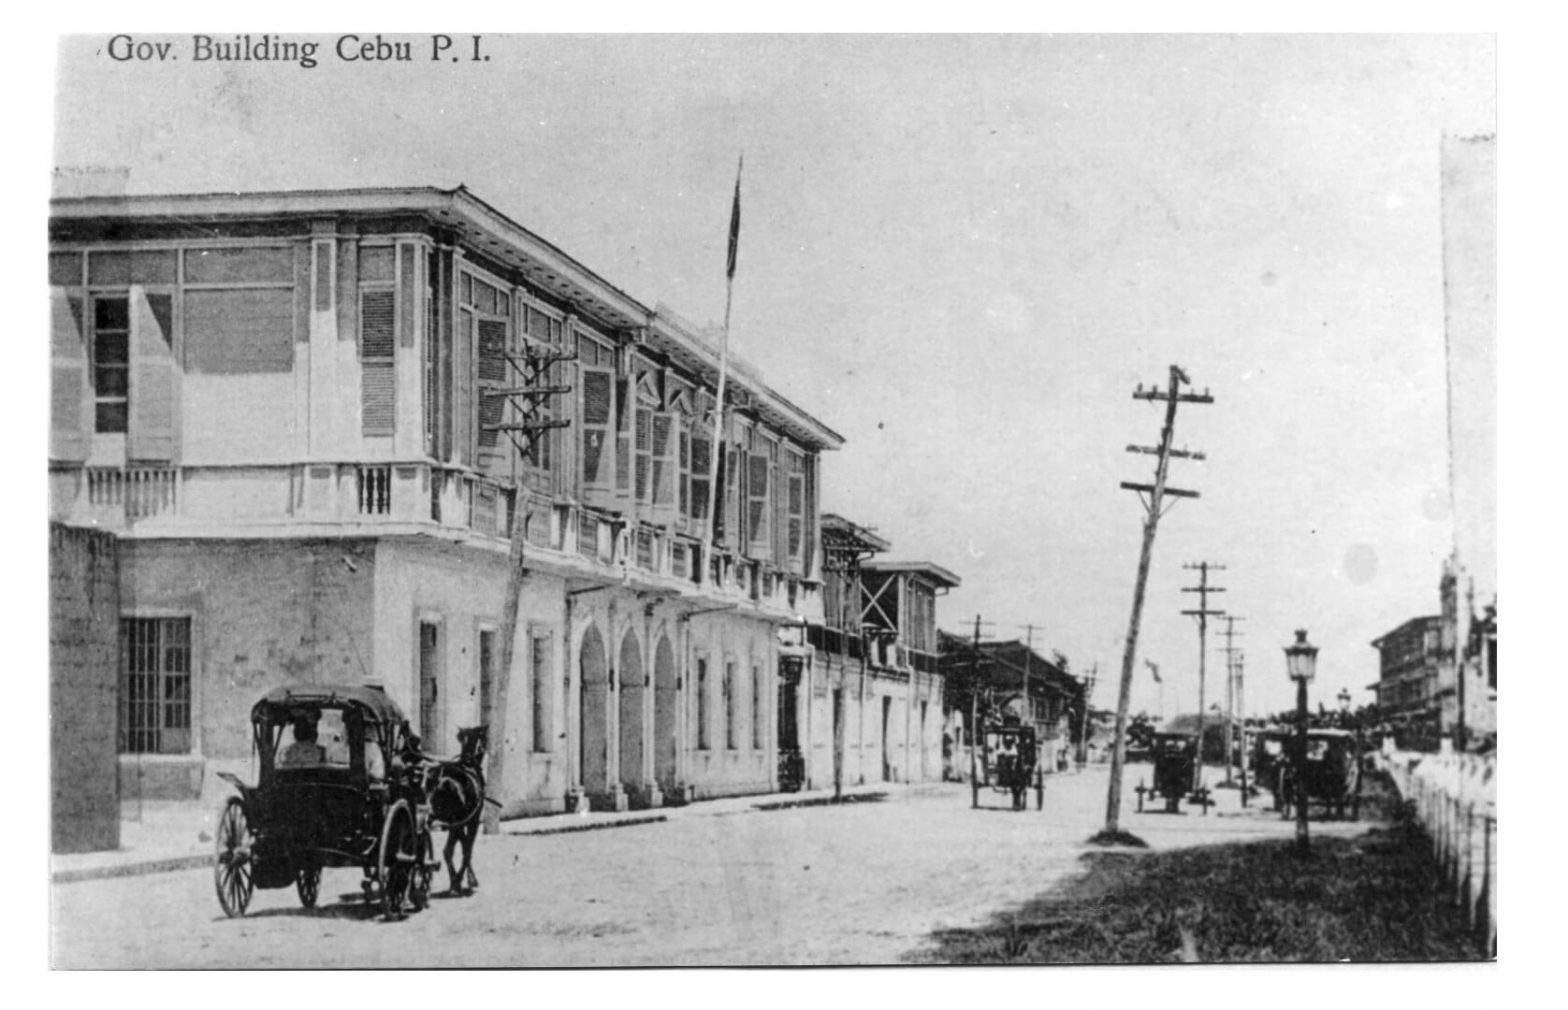 TBT: Did you know the capitol was once located across Plaza Independencia?